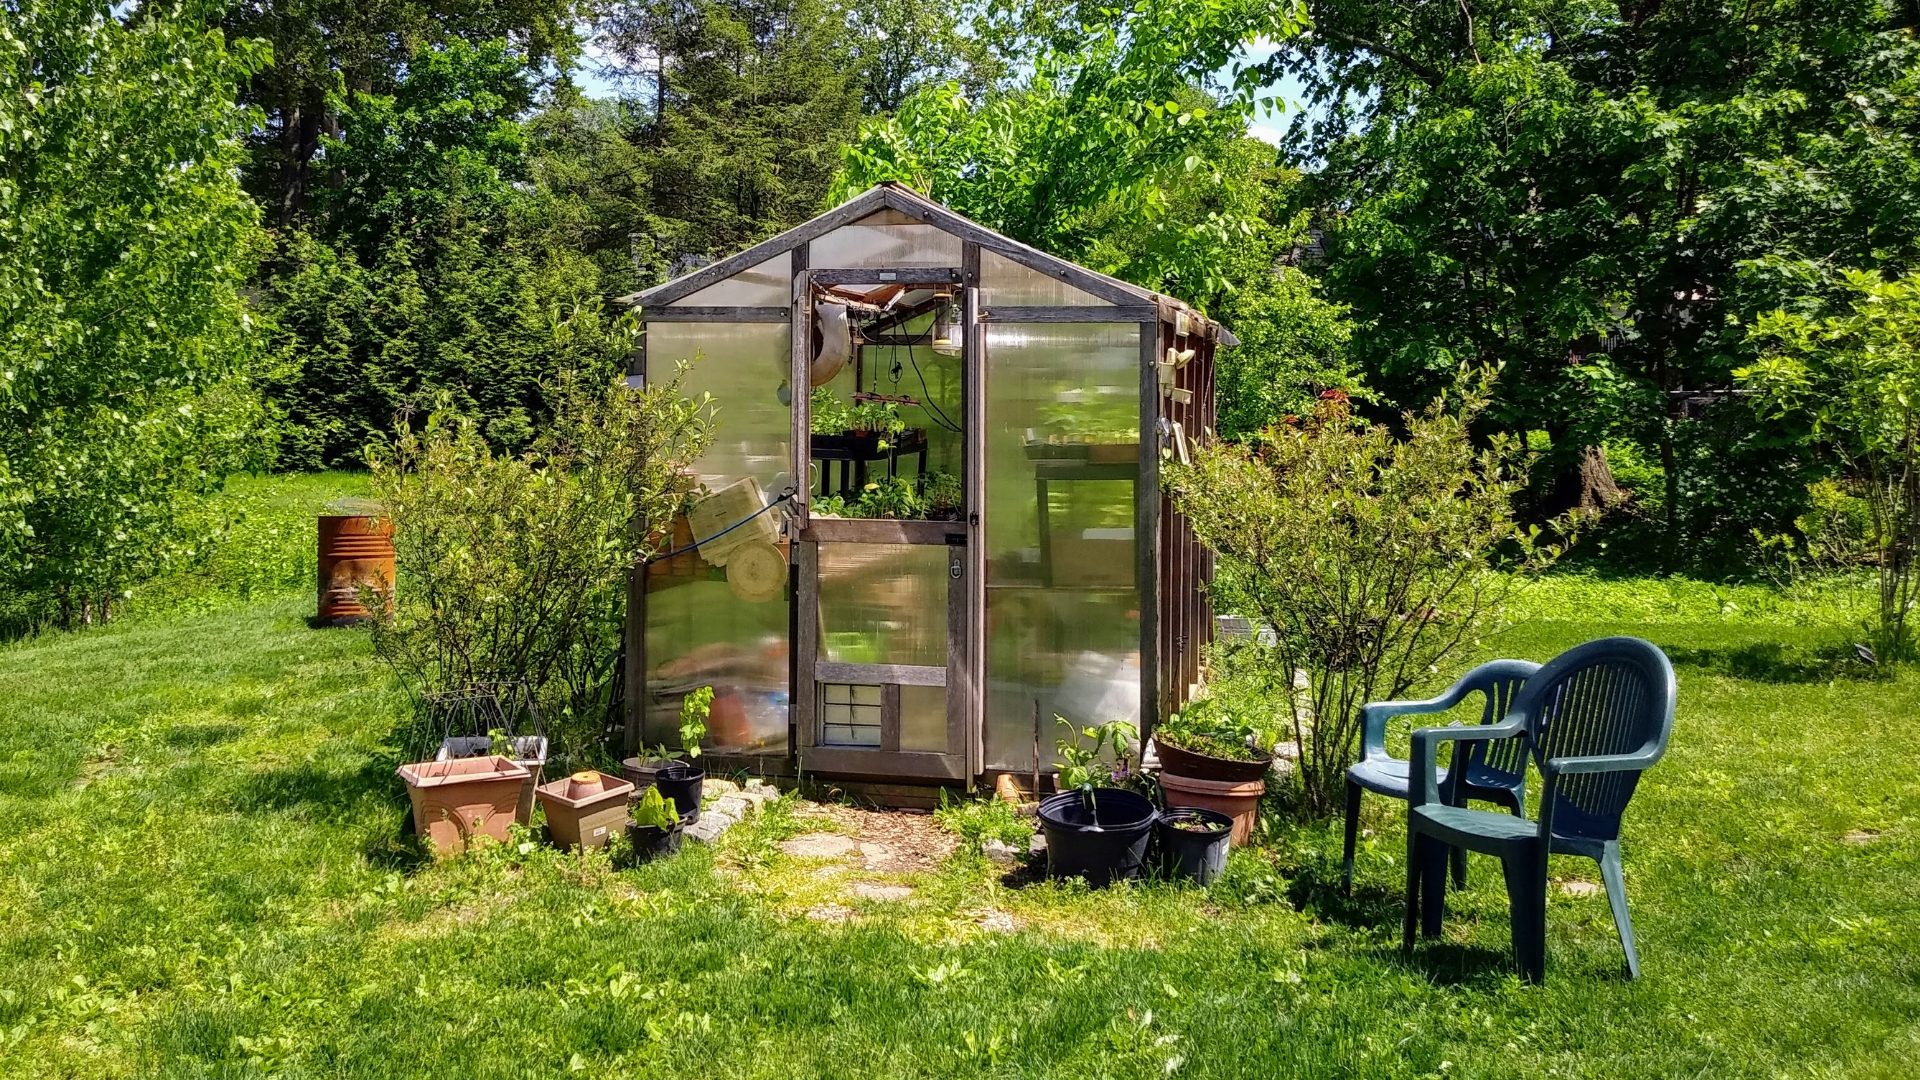 A small greenhouse in the middle of a garden.